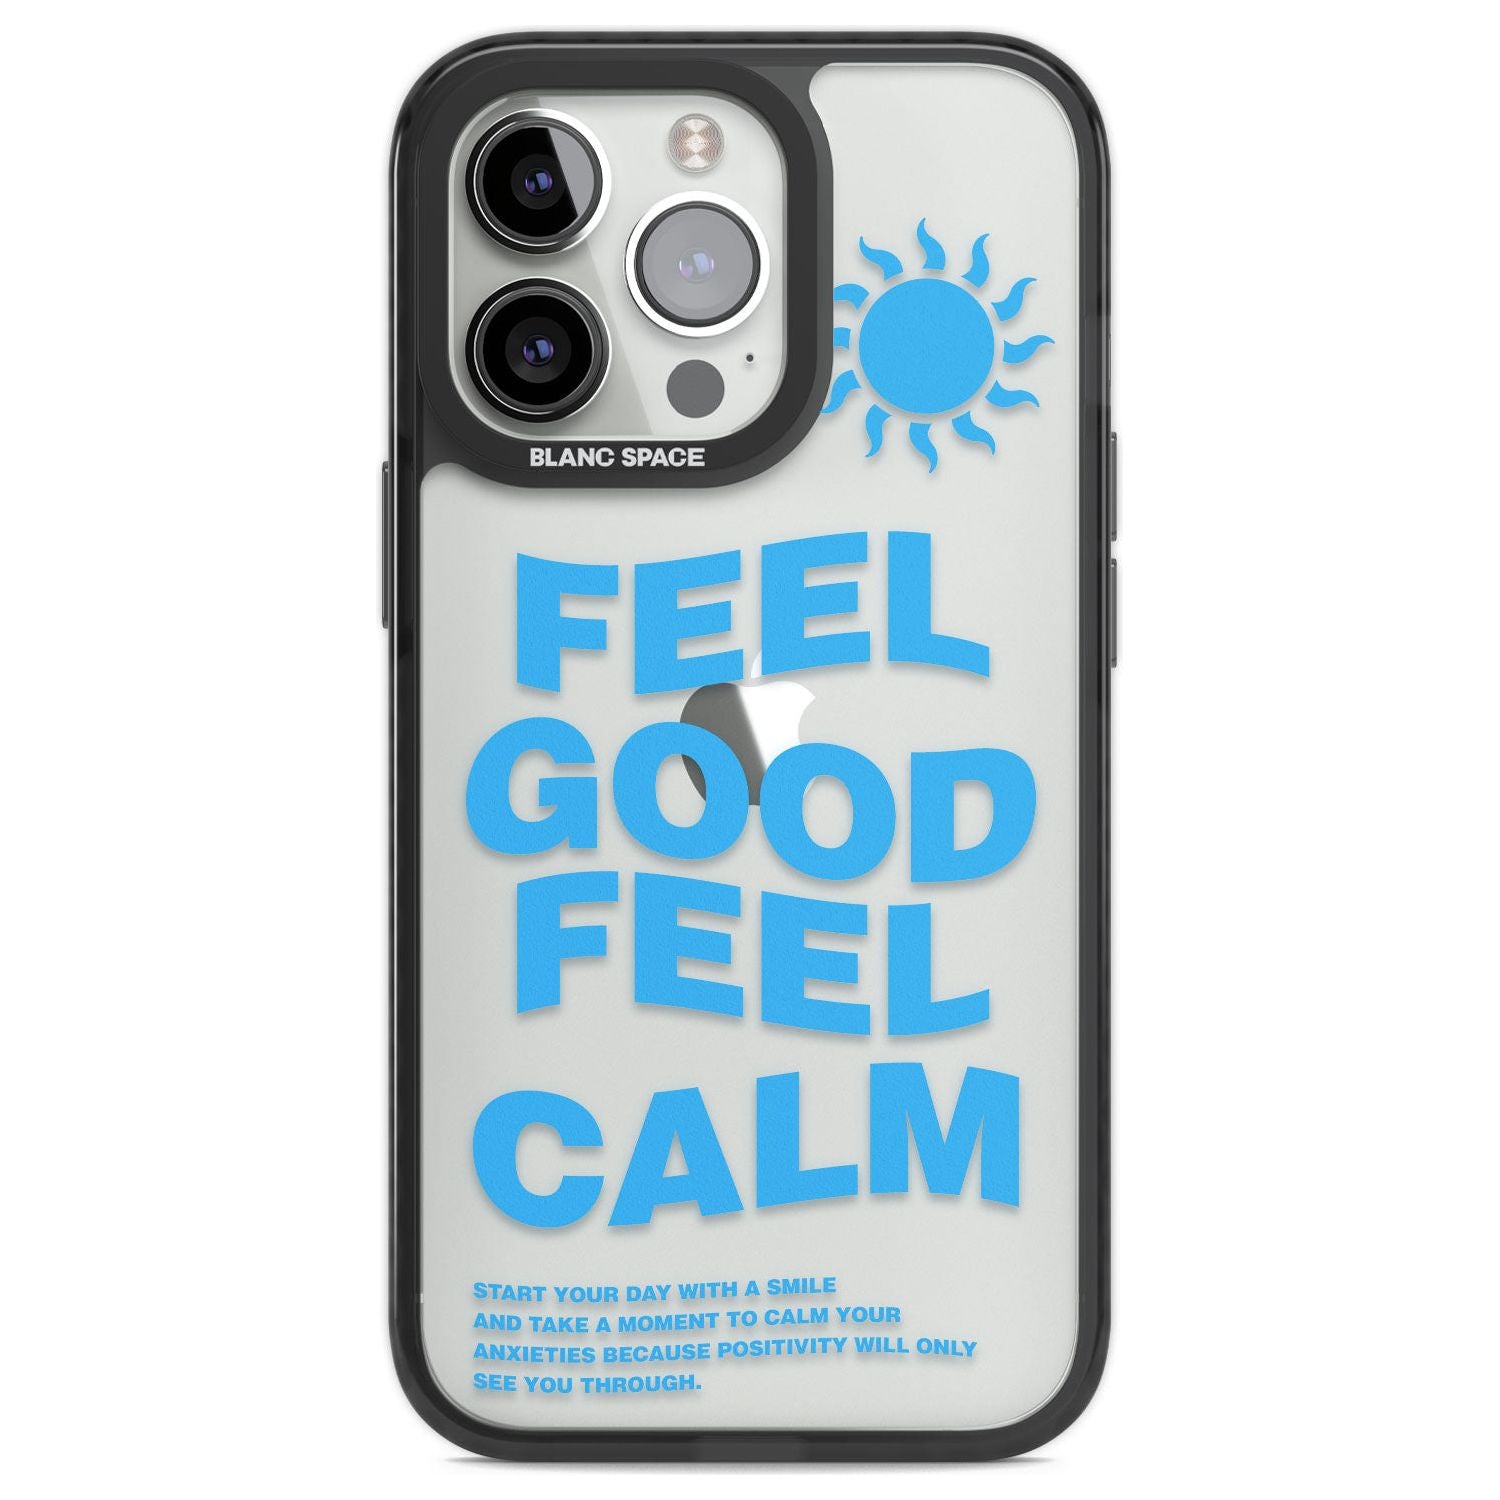 Feel Good Feel Calm (Green)Phone Case for iPhone 14 Pro